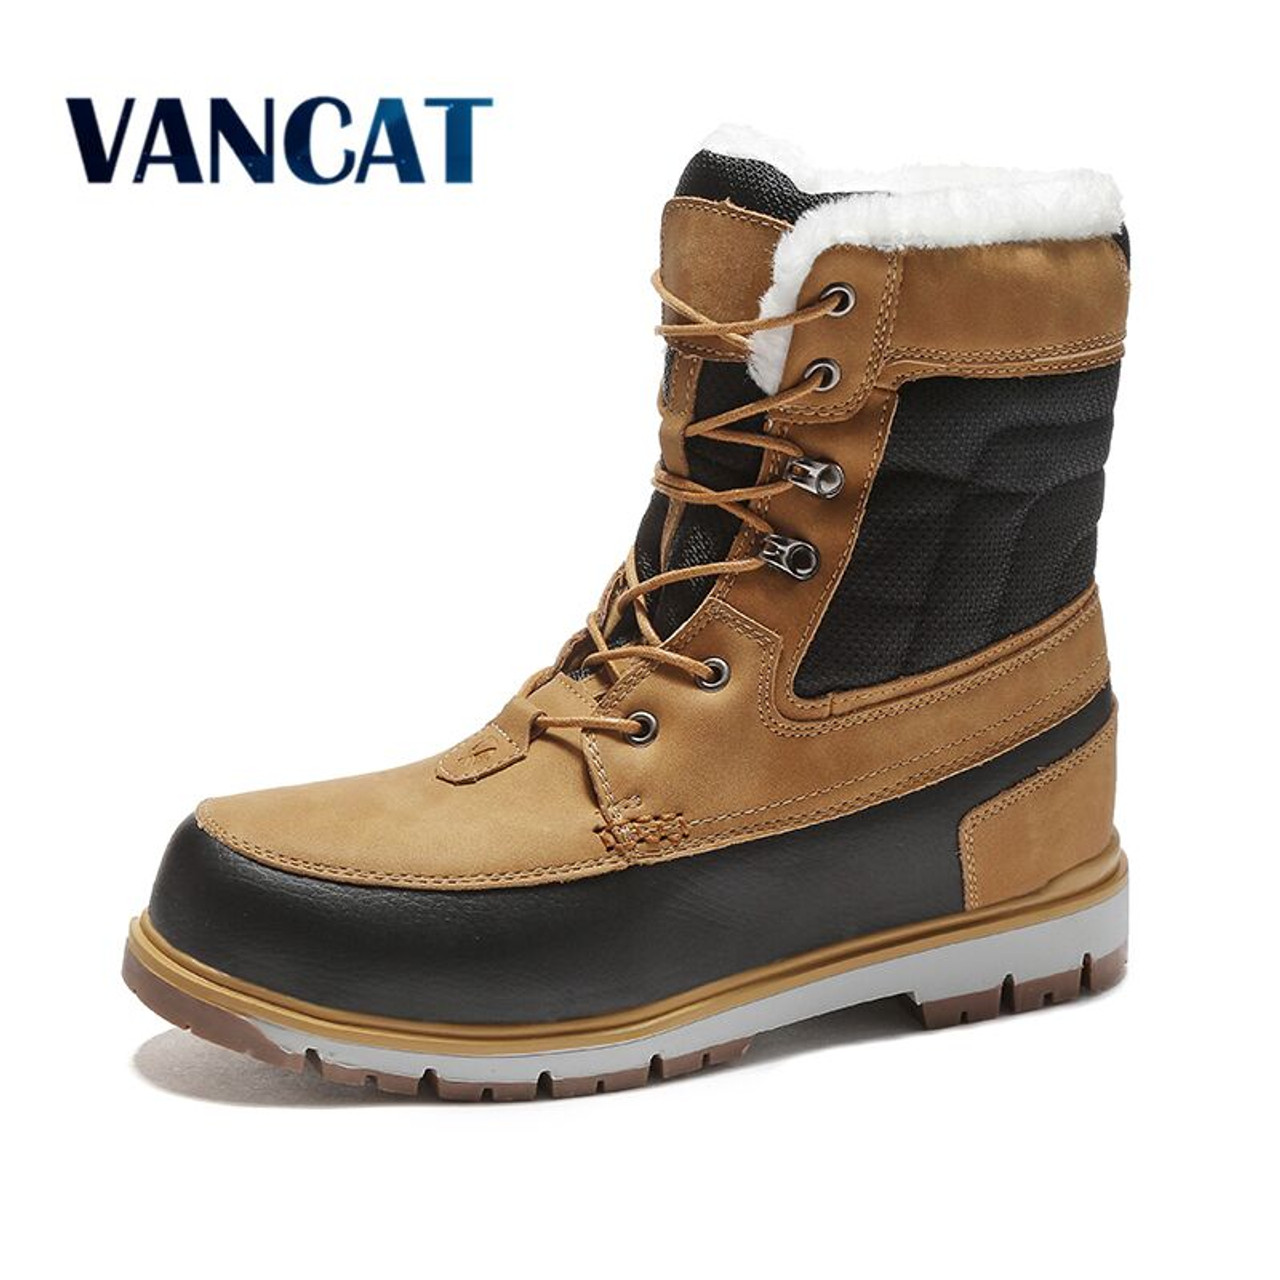 men's casual motorcycle boots